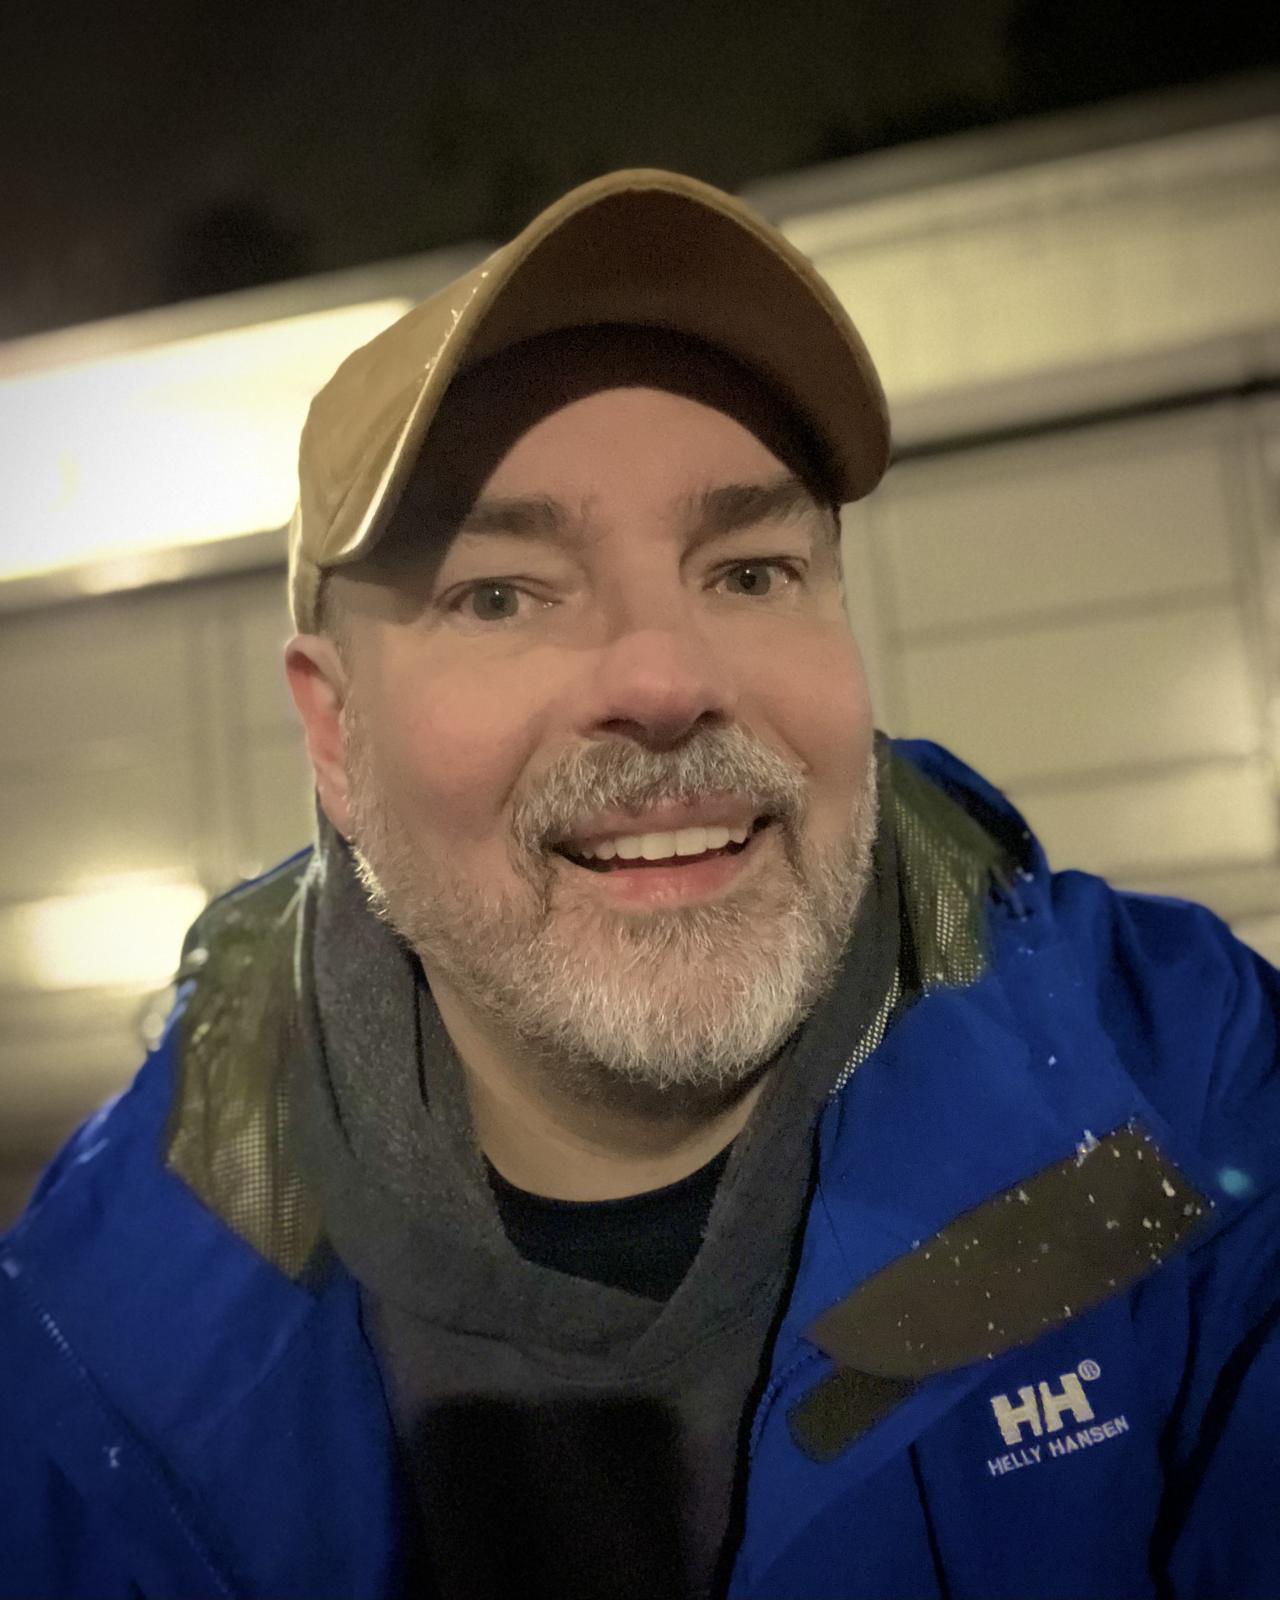 Matt Calkins putting on a happy face while the Bellevue Washington weather is freezing.